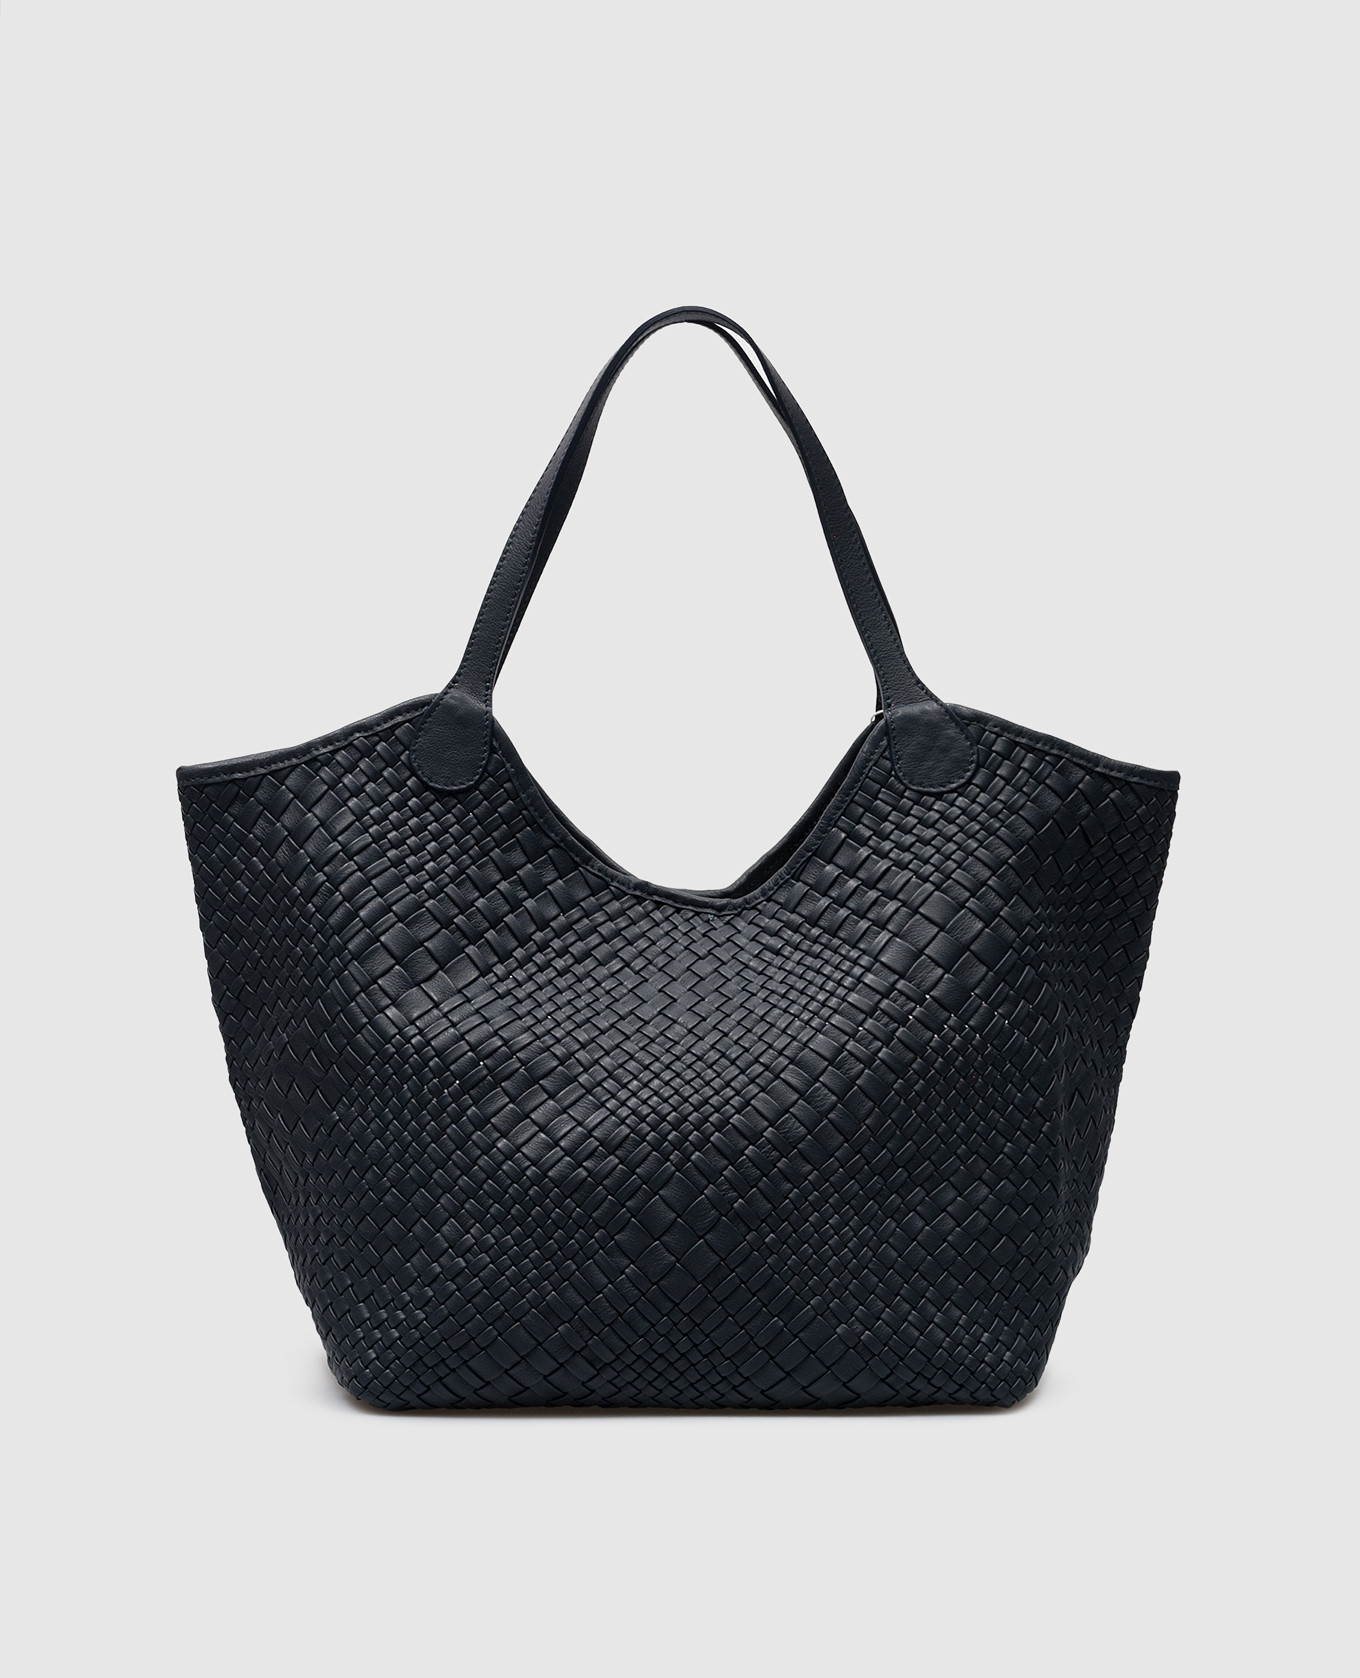 Blue leather woven tote bag